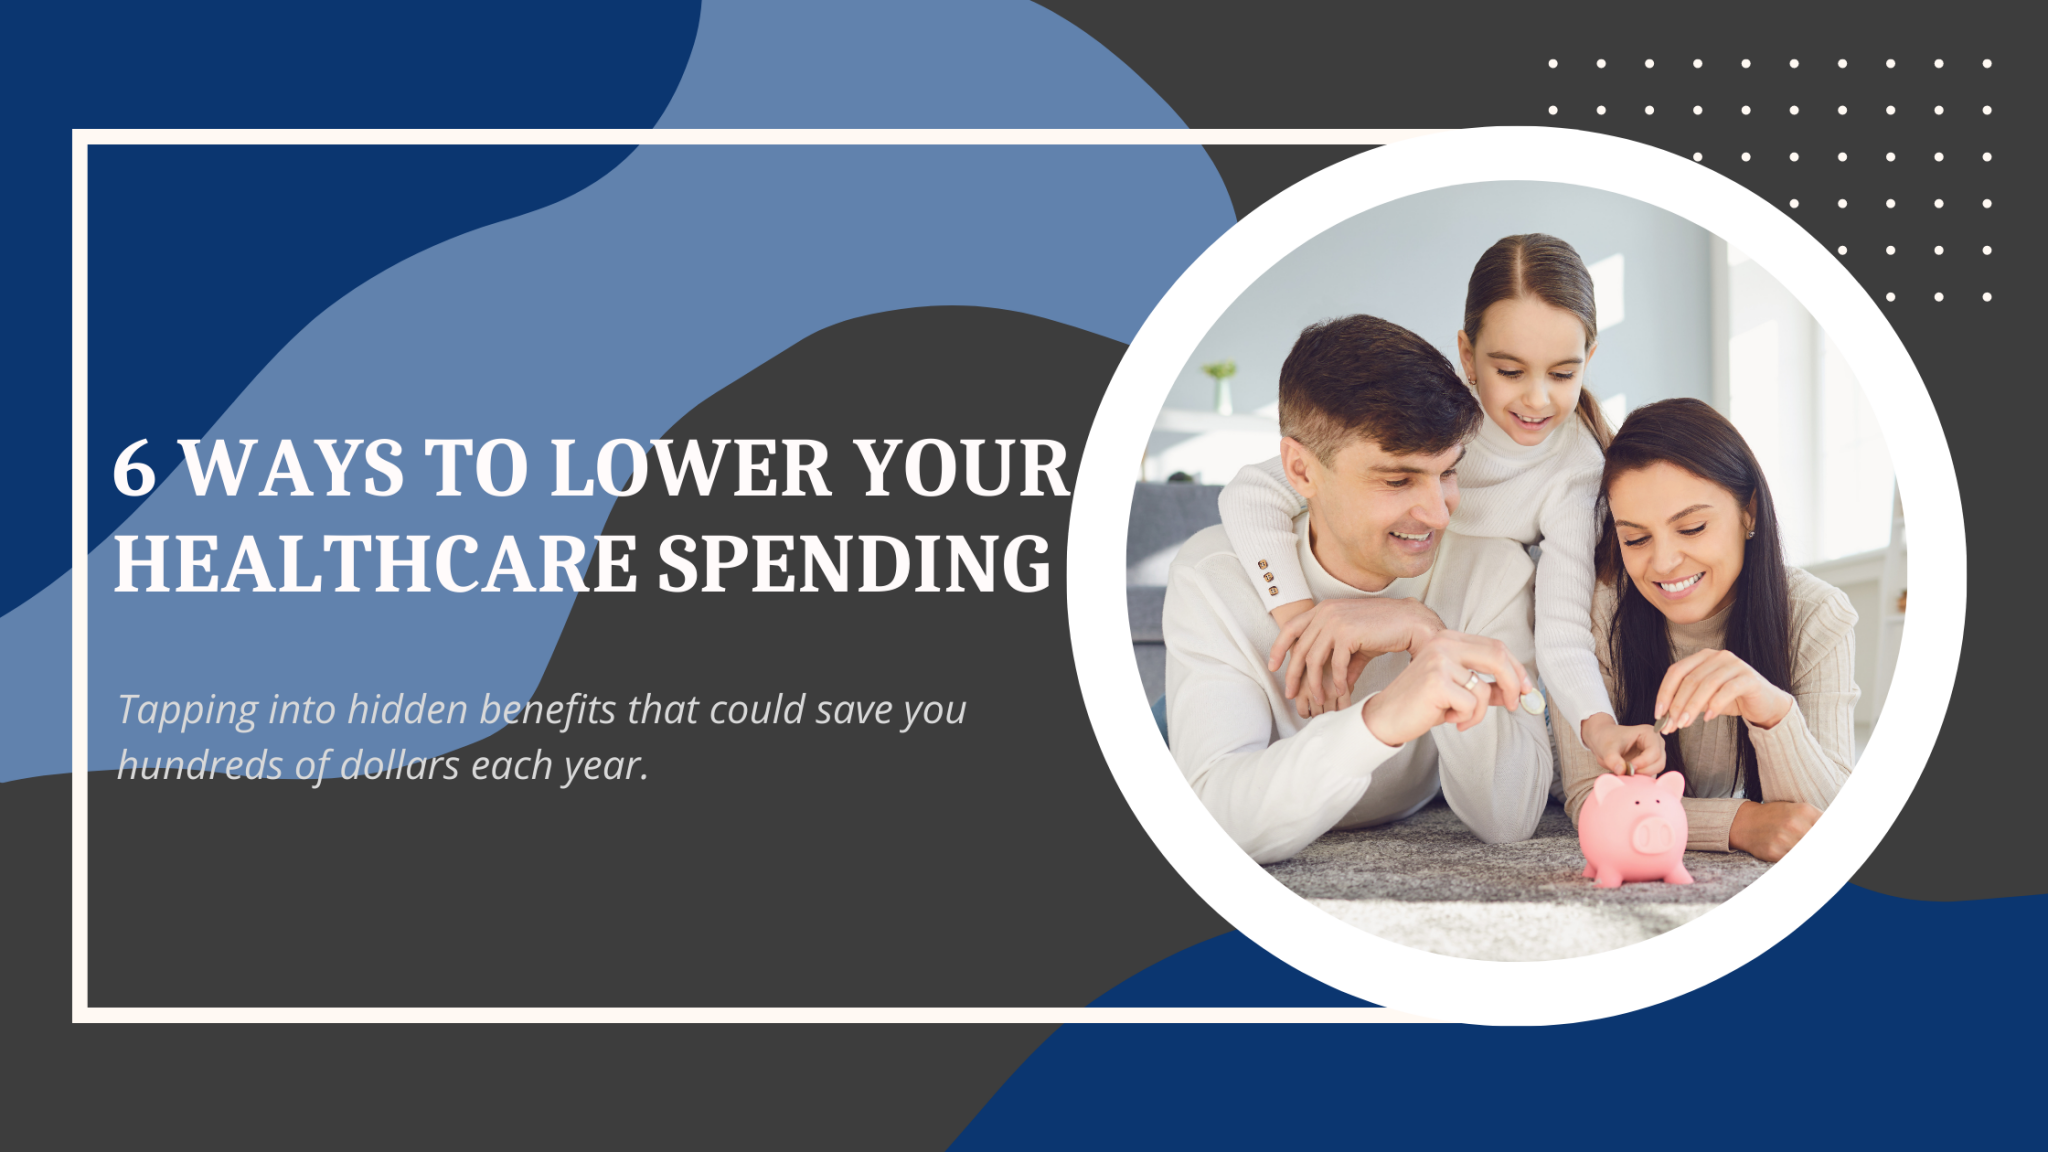 6 Ways to Lower Your Healthcare Spending